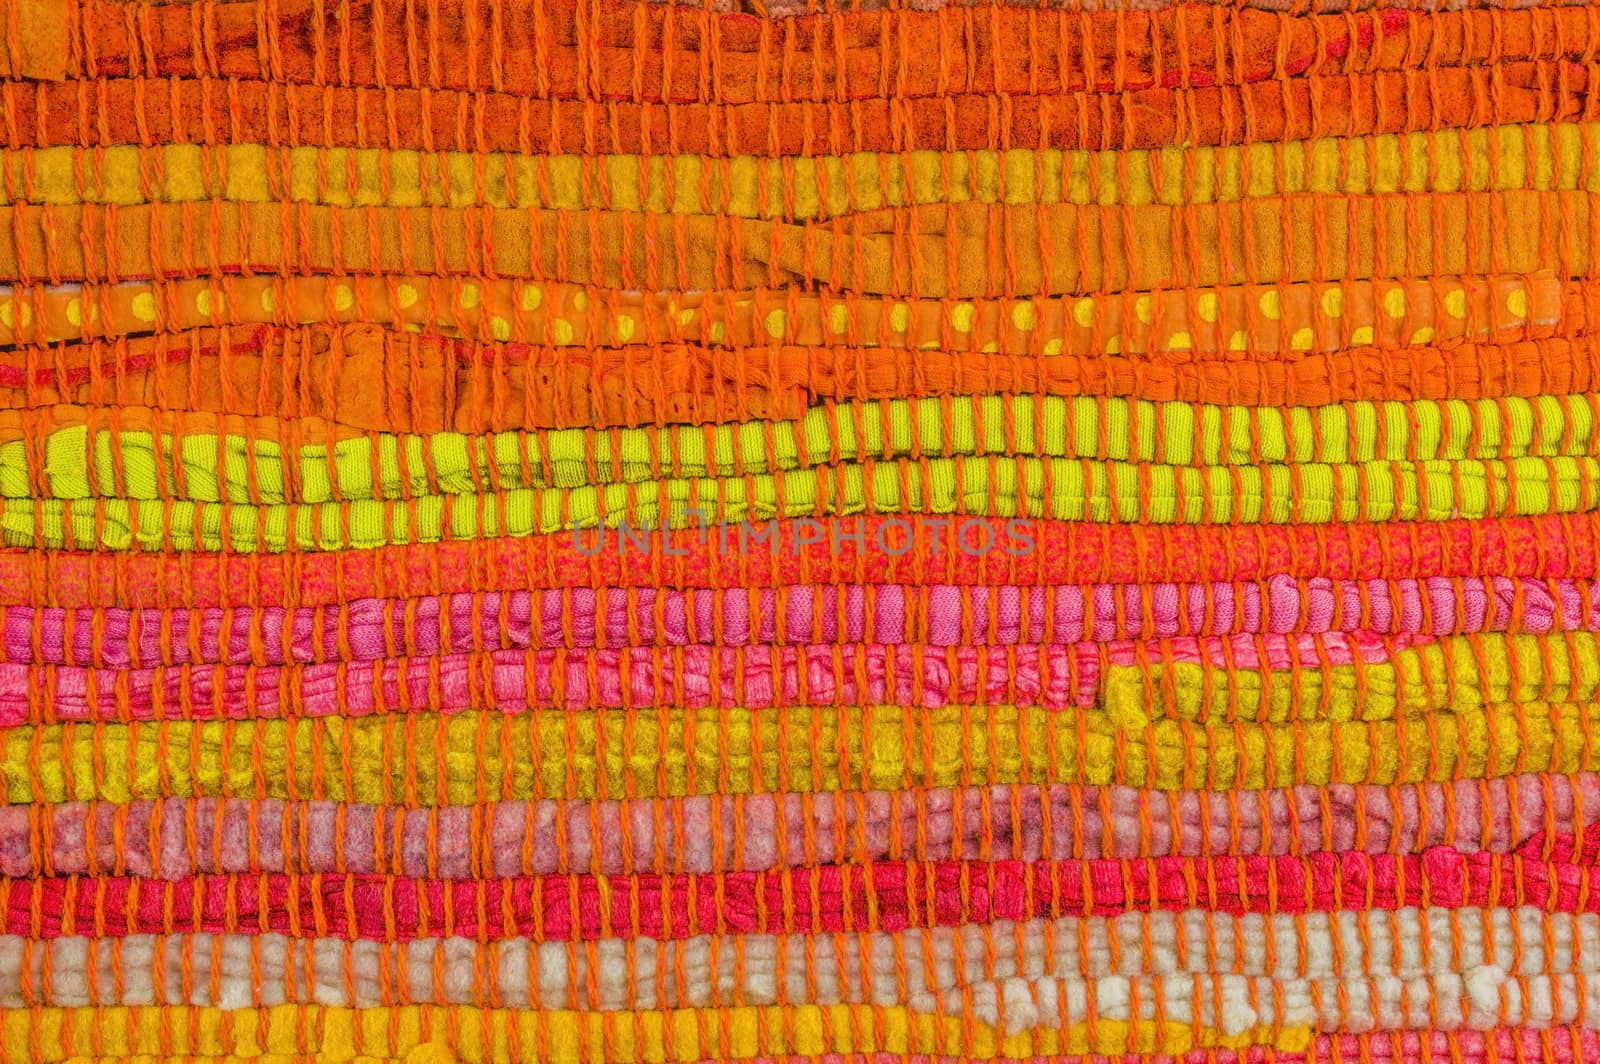 Textile background in red, yellow, orange, pink and green manually weaved